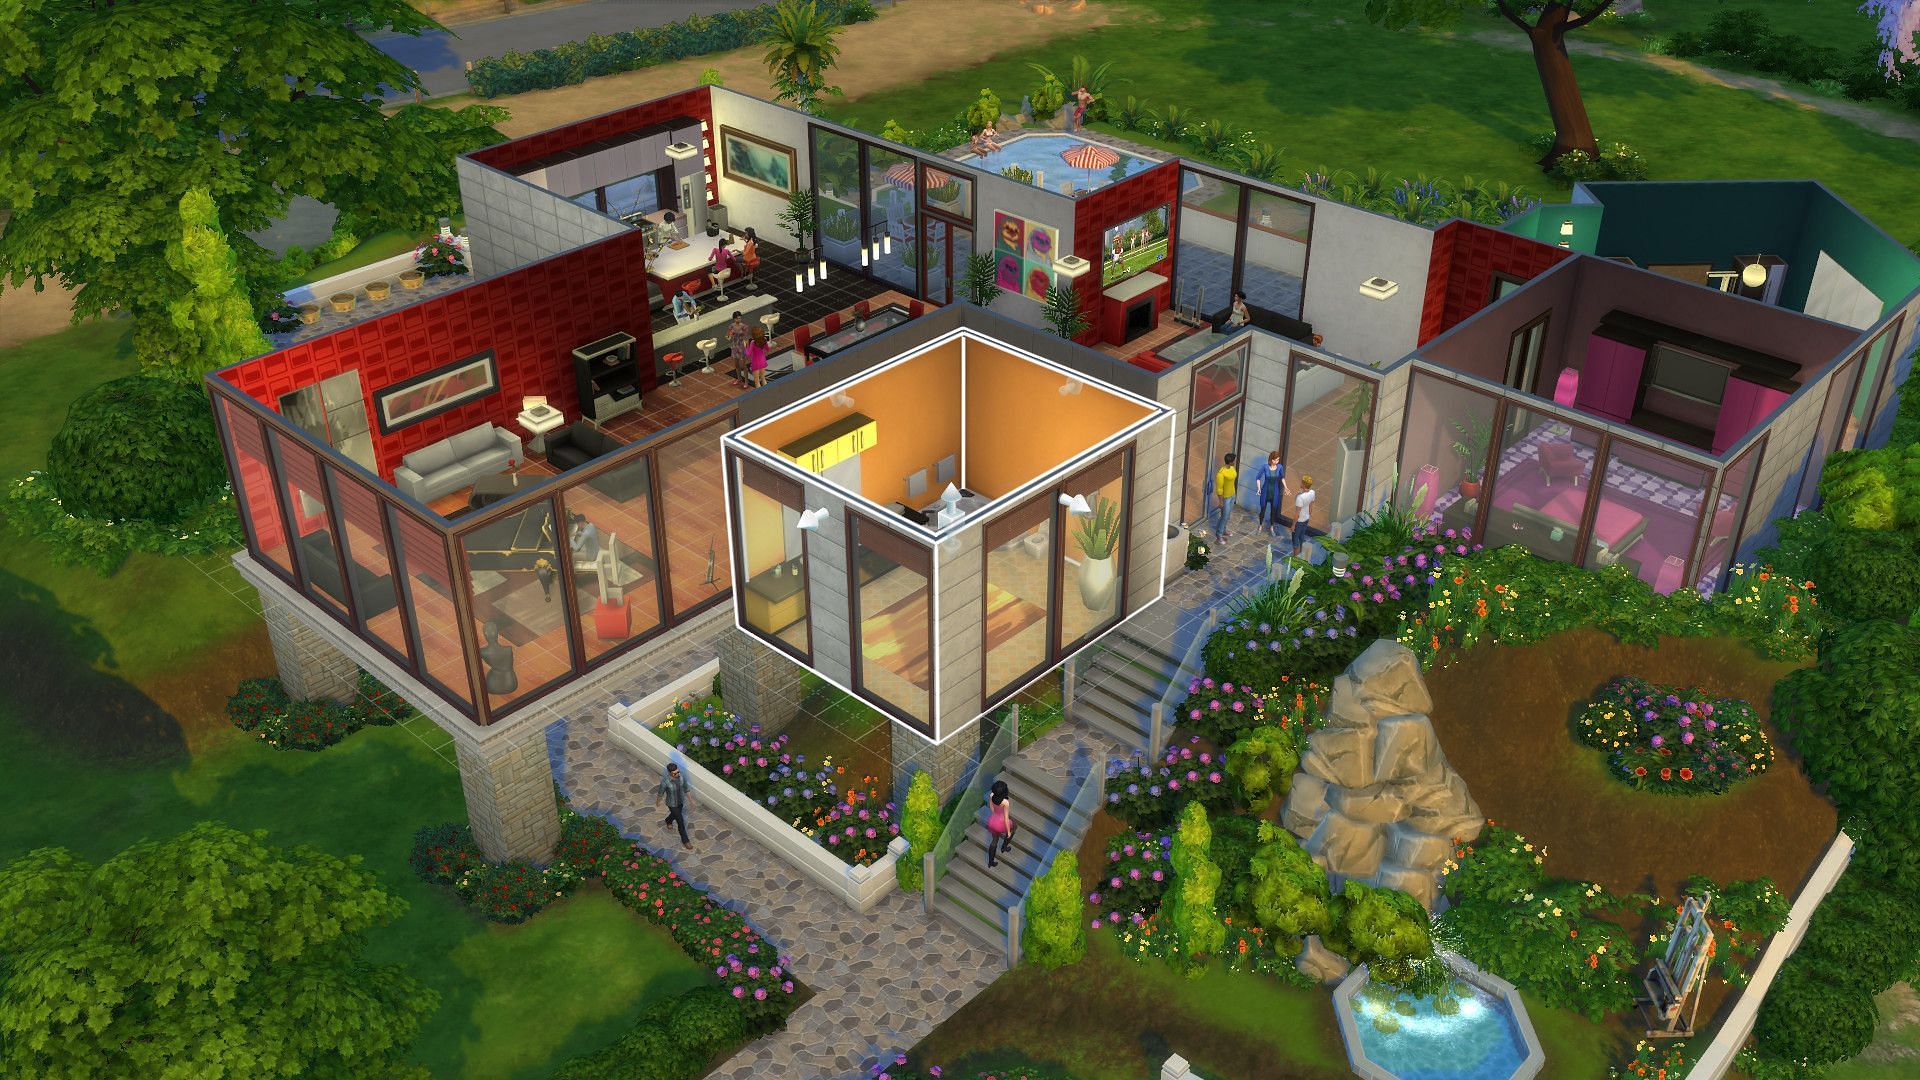 The Sims 4 is a social simulation game developed by Maxis (image by Electronic Arts).